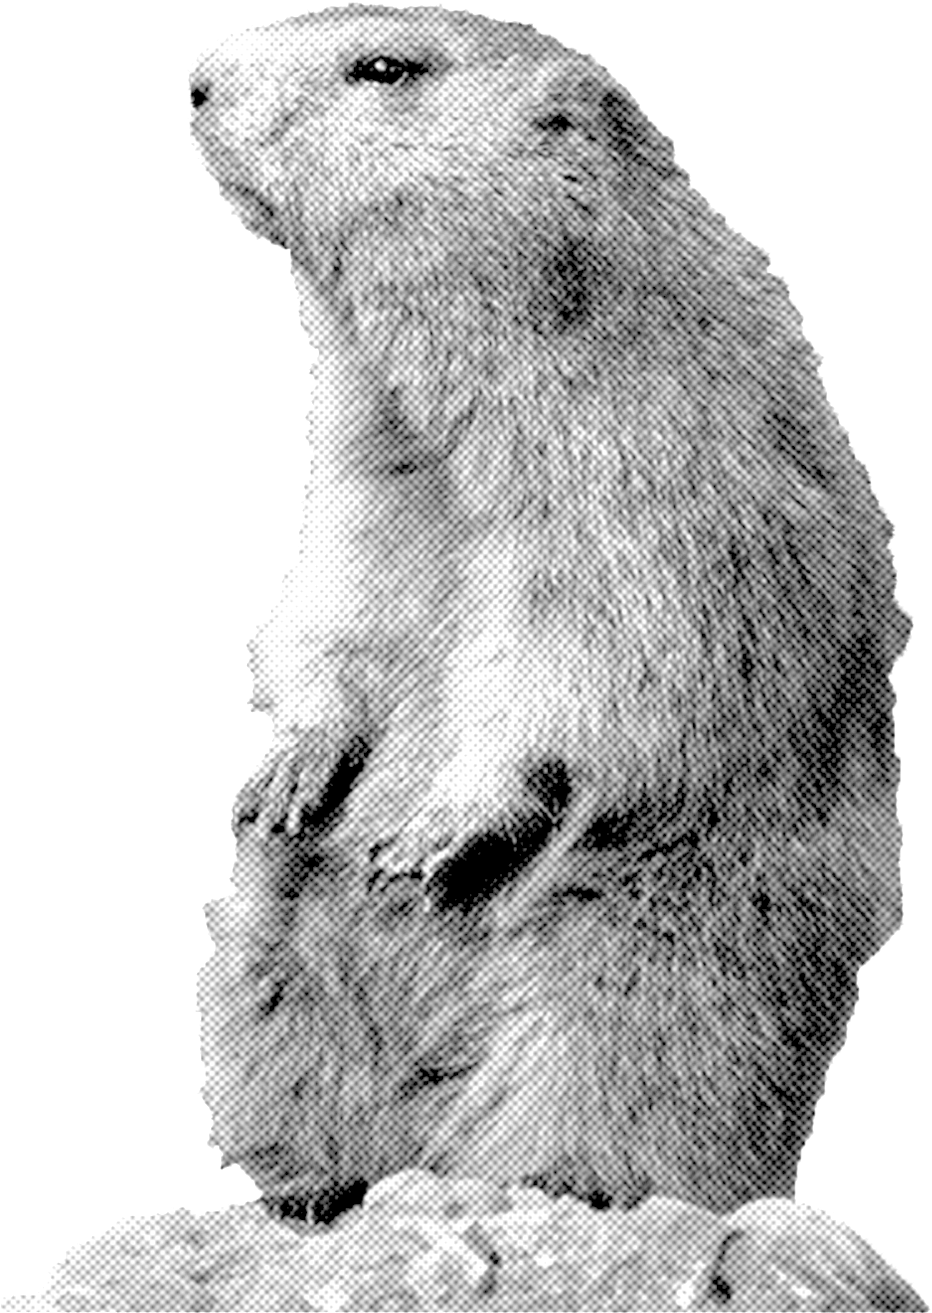 A Black And White Image Of A Furry Animal